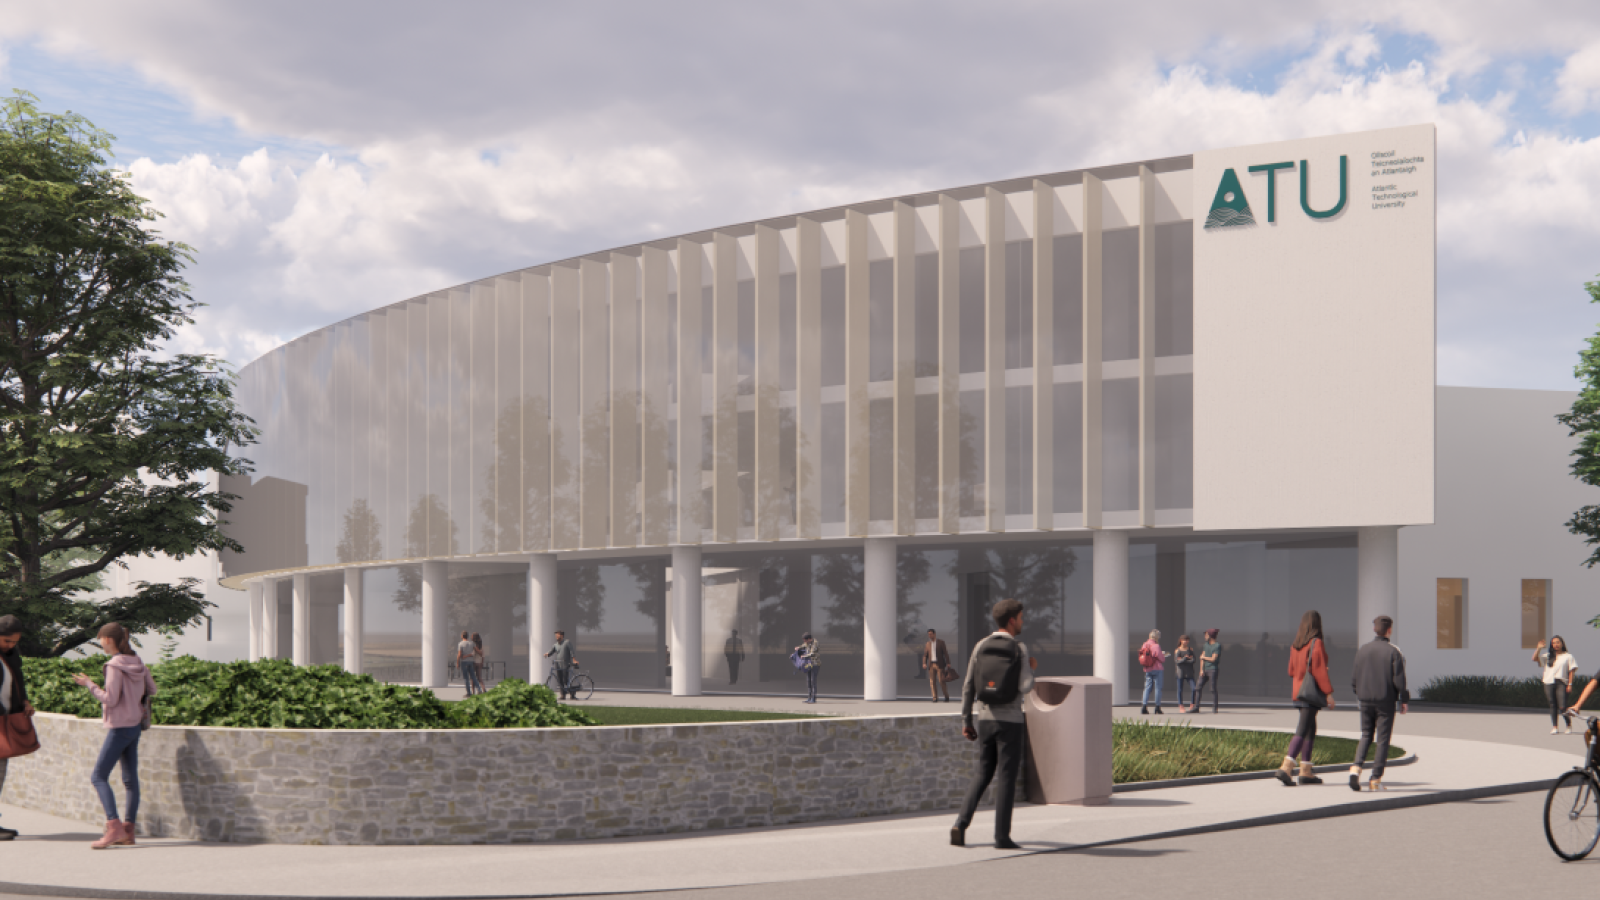 PLANS PROGRESS FOR FUTURE LIVING LABORATORY AND DIGITAL SUITE AT ATU GALWAY